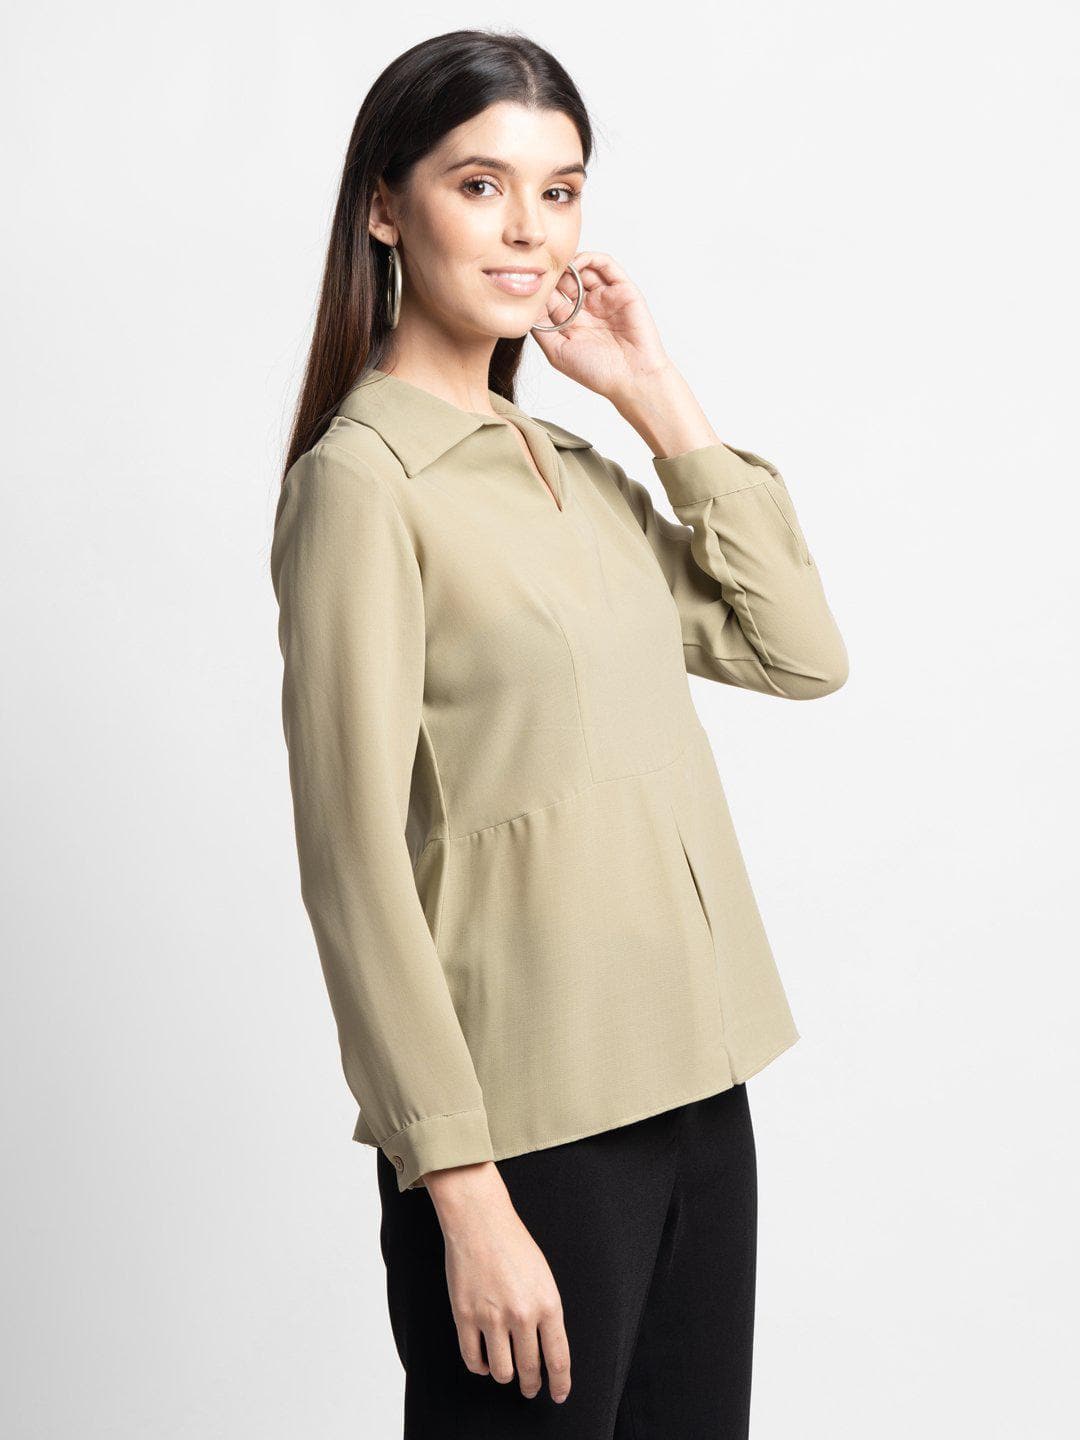 Collared Poly Moss Top - Celadon Green